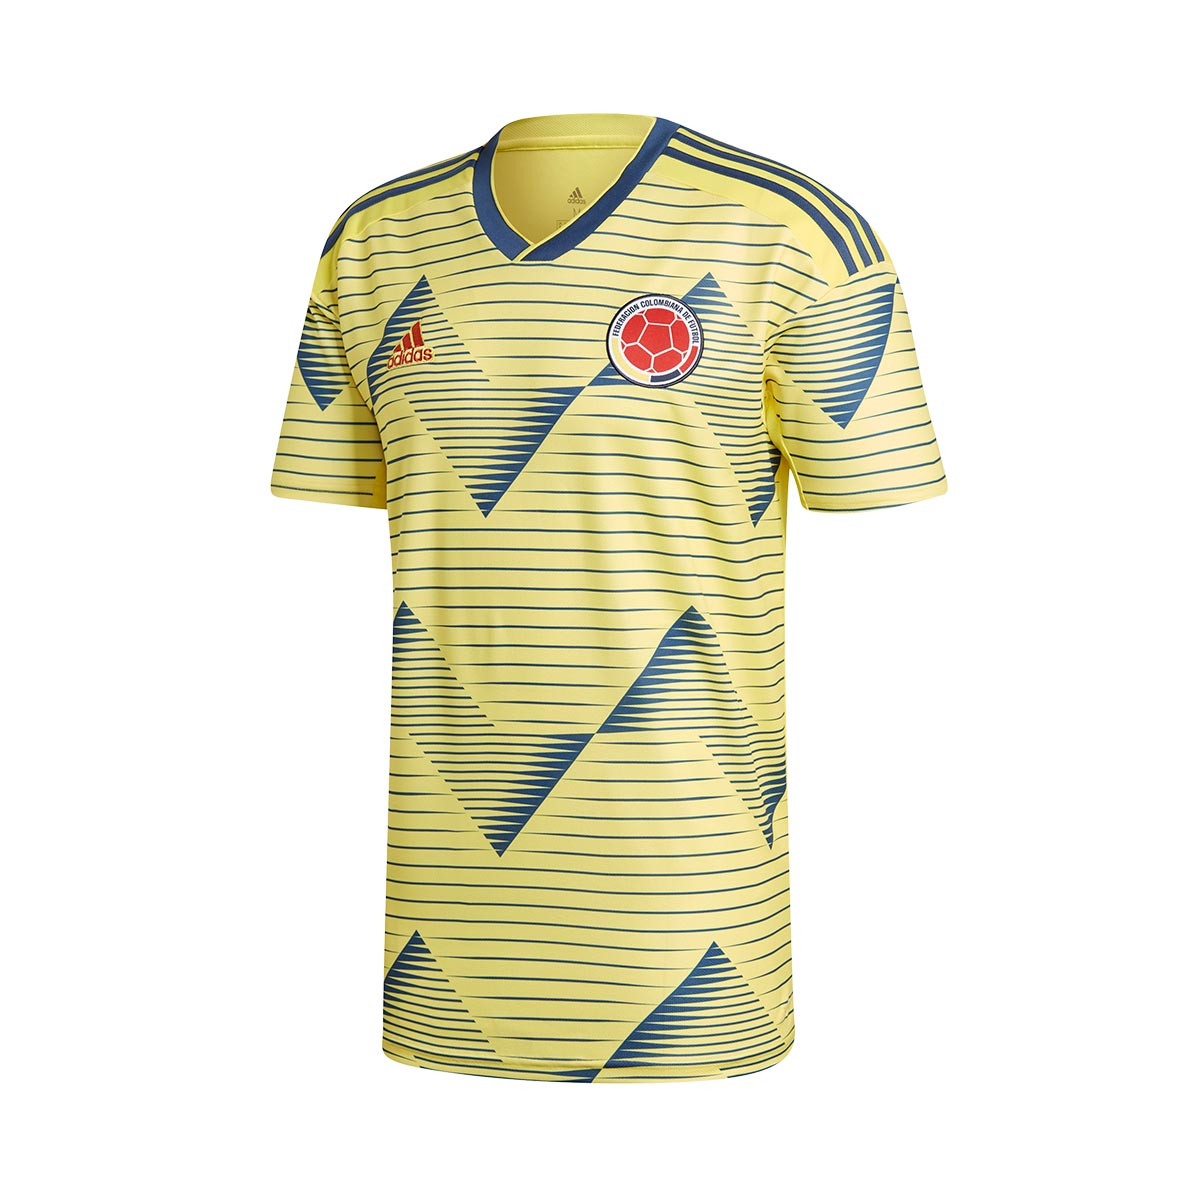 adidas colombia jersey 2019